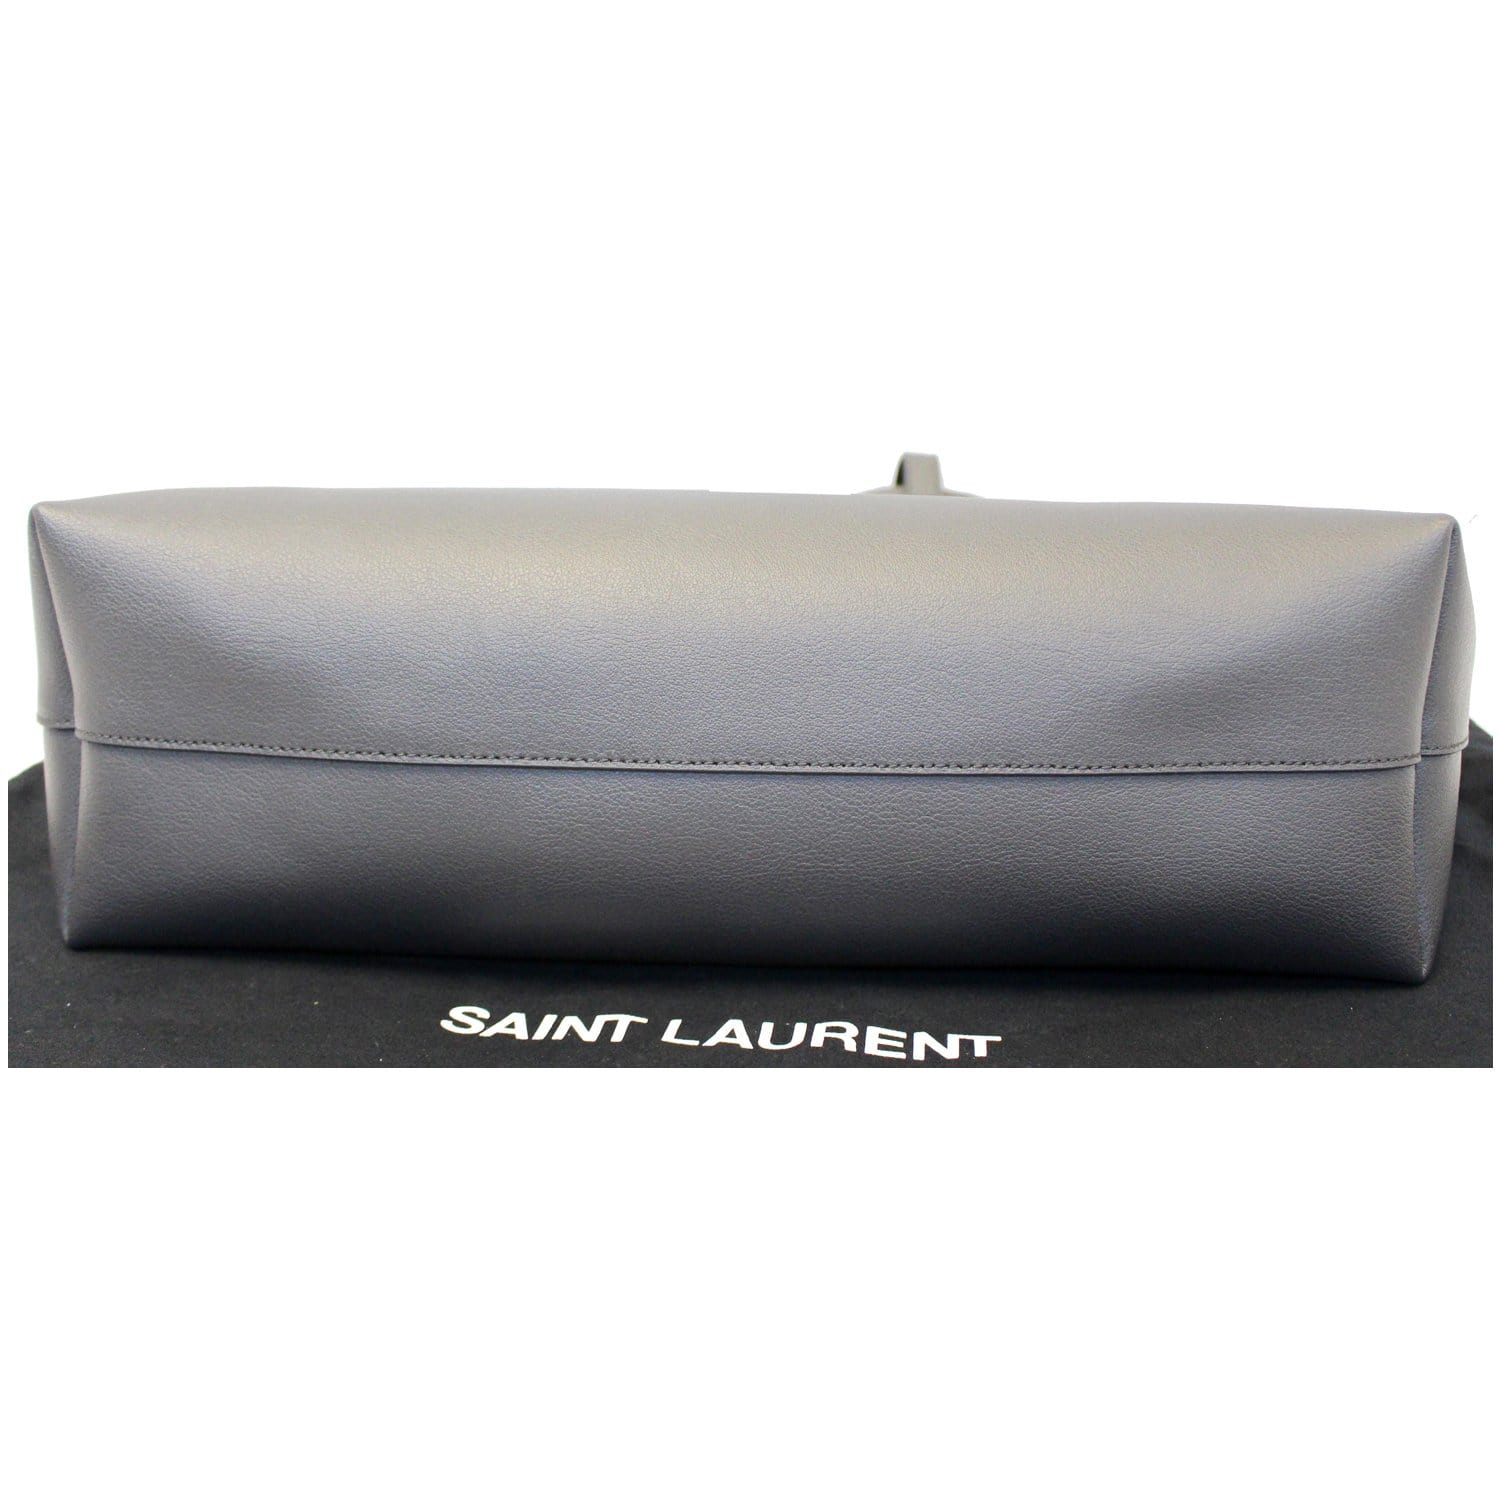 Shopping E W Leather Tote in Grey - Saint Laurent